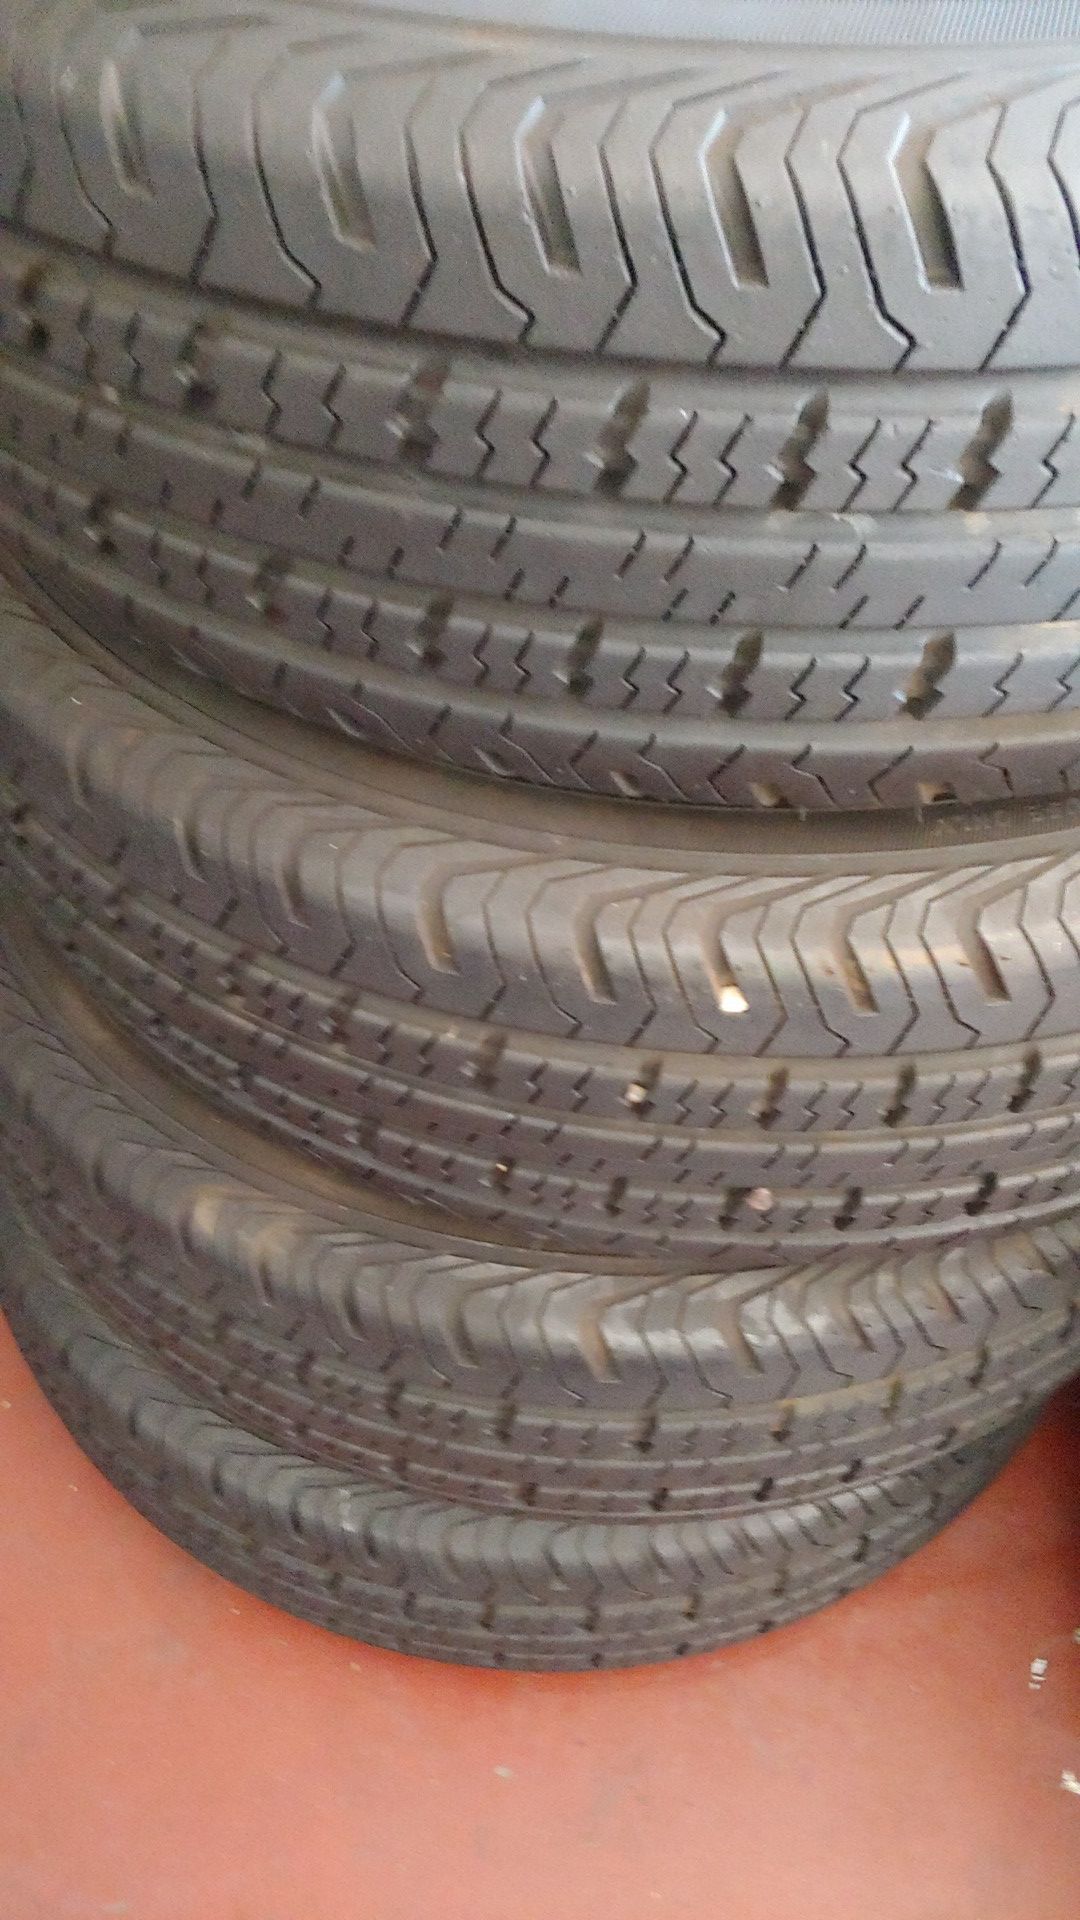 225,75 15 trailer tires set used good condition